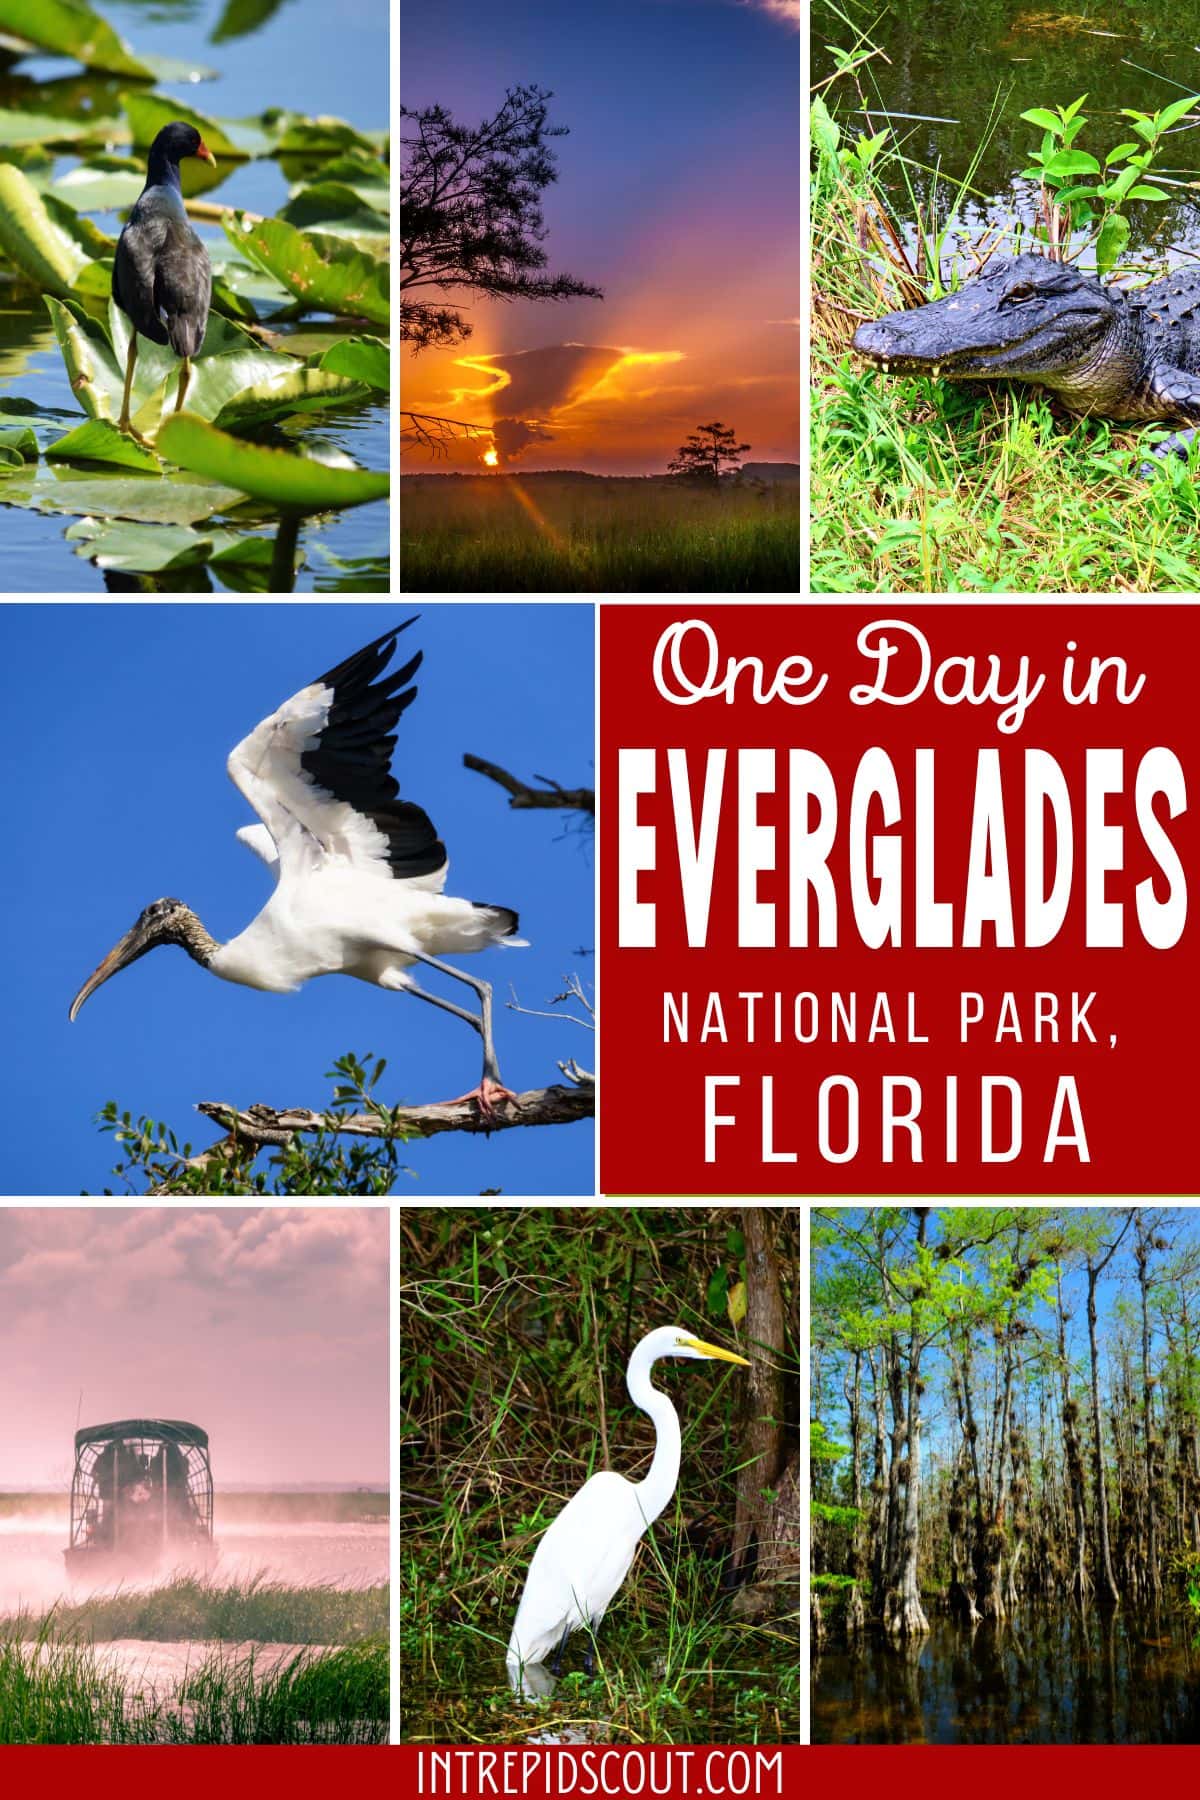 One Day in Everglades